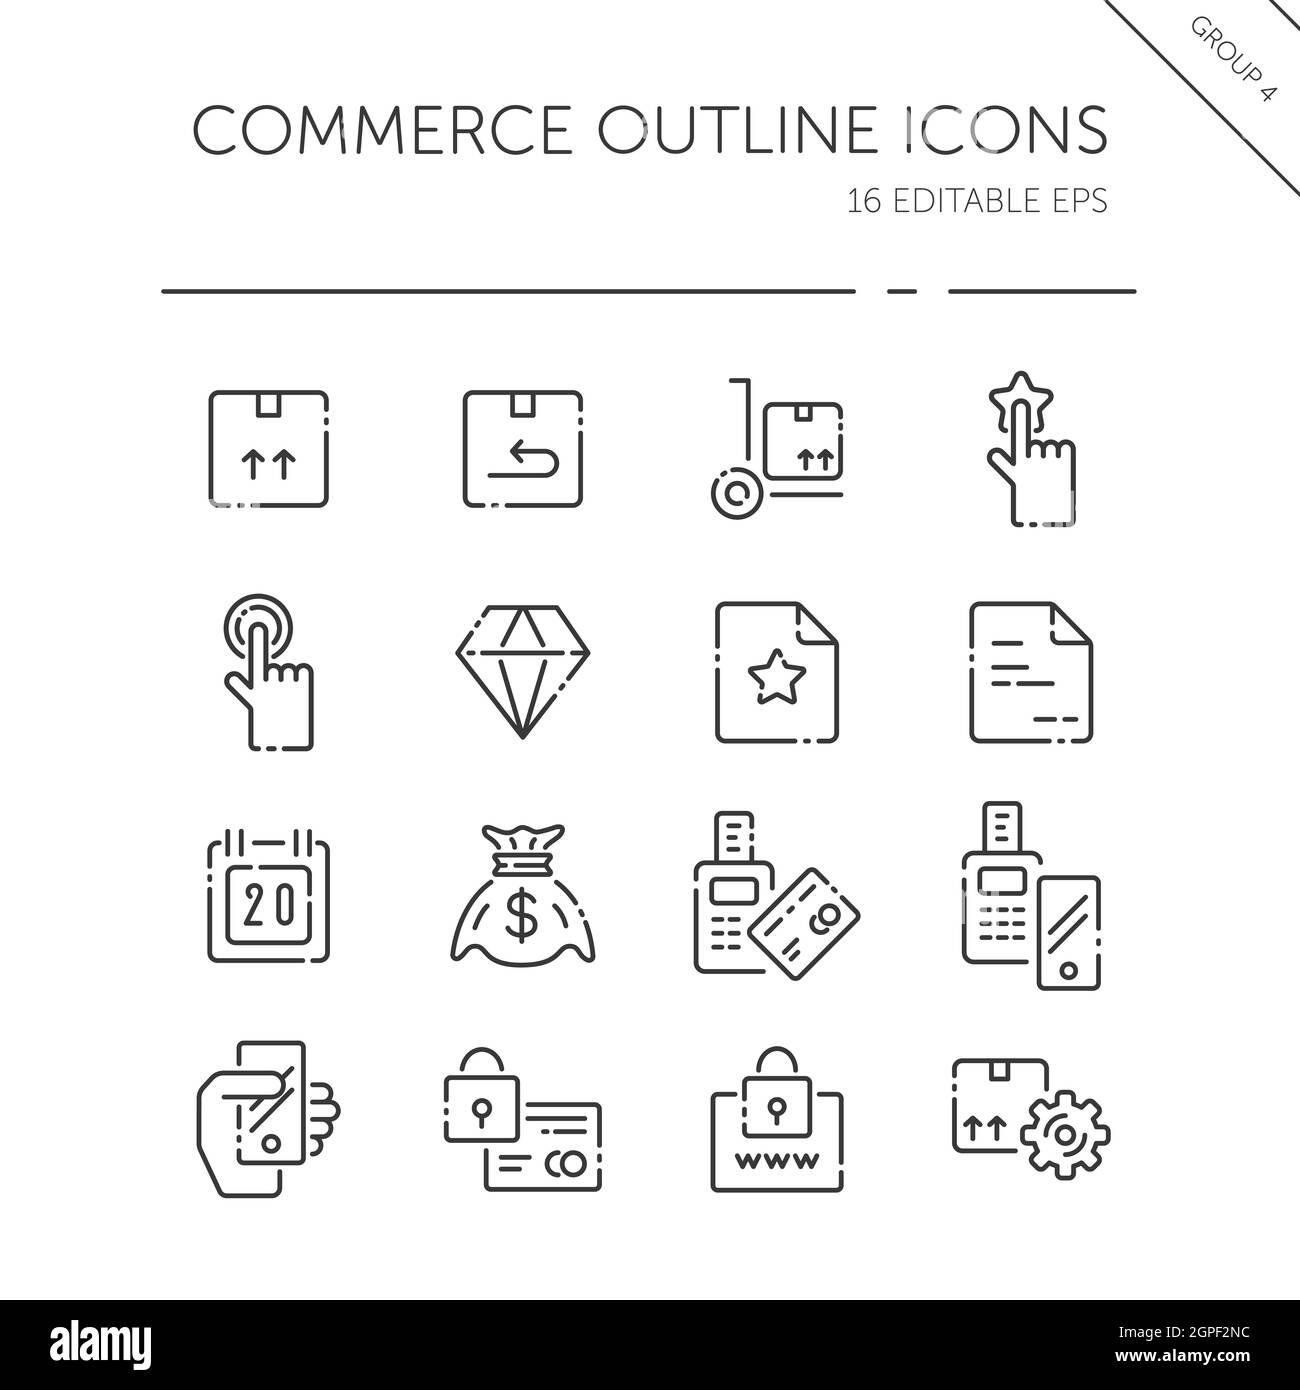 Commerce thin line icon set. Box, diamond, hand, swiping machine, security, money and calendar. Outline vector illustration Stock Vector